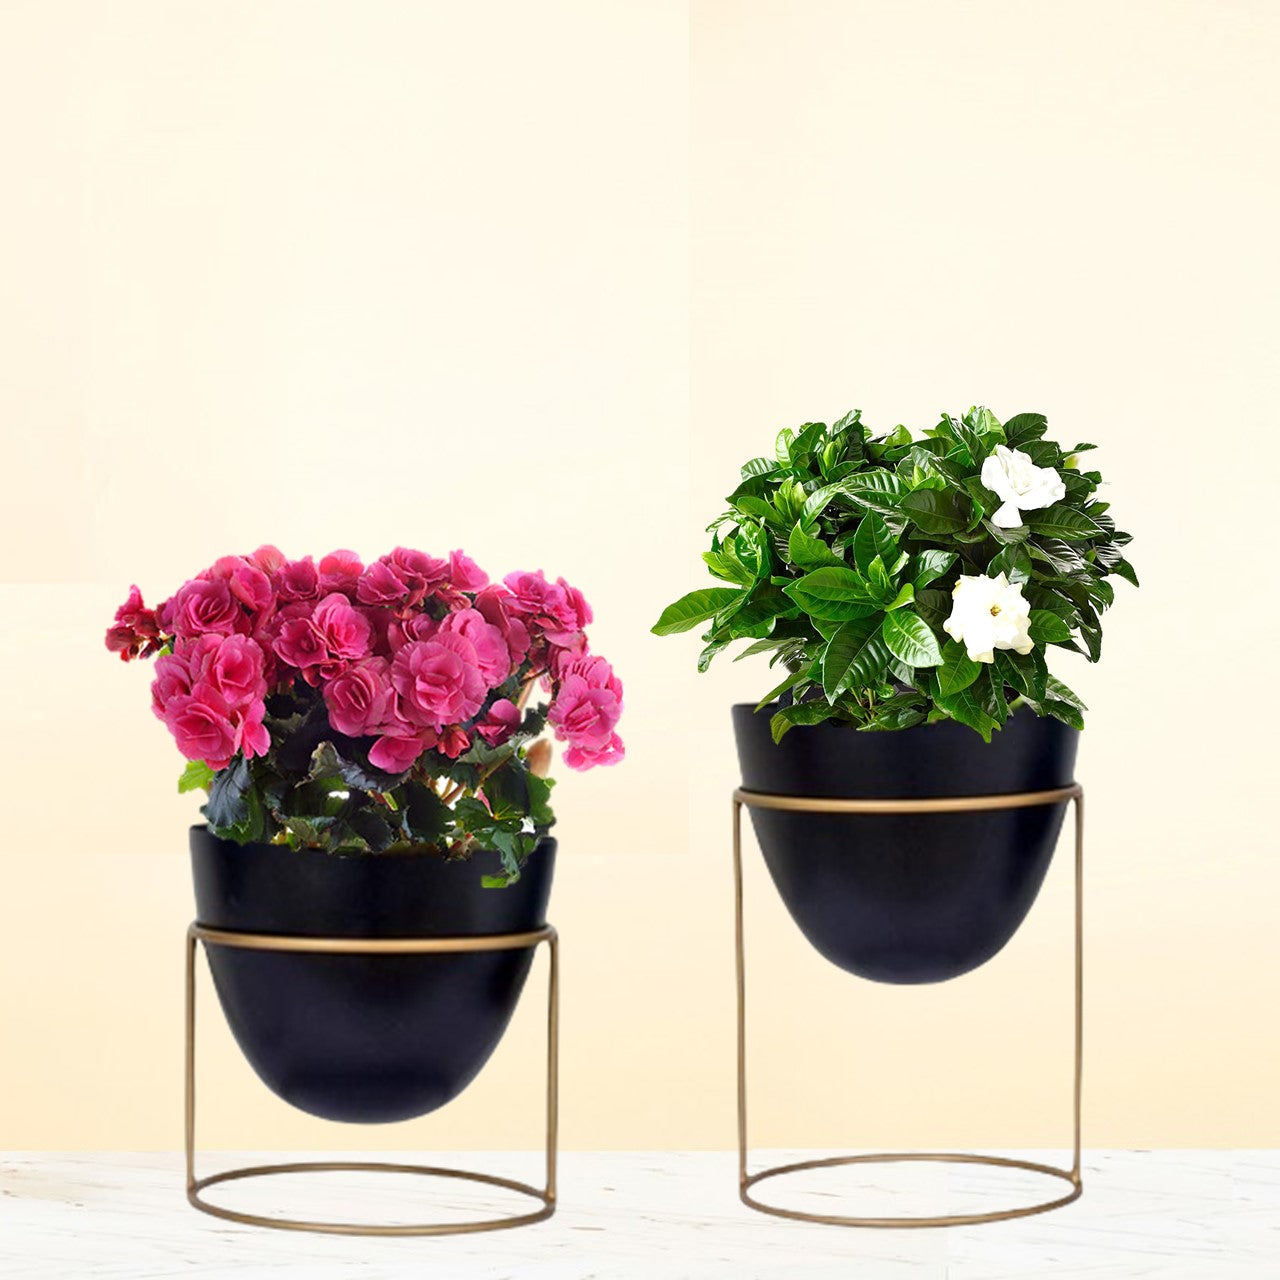 Alle Black Metal Plant Pot with Stand (Set of 2)